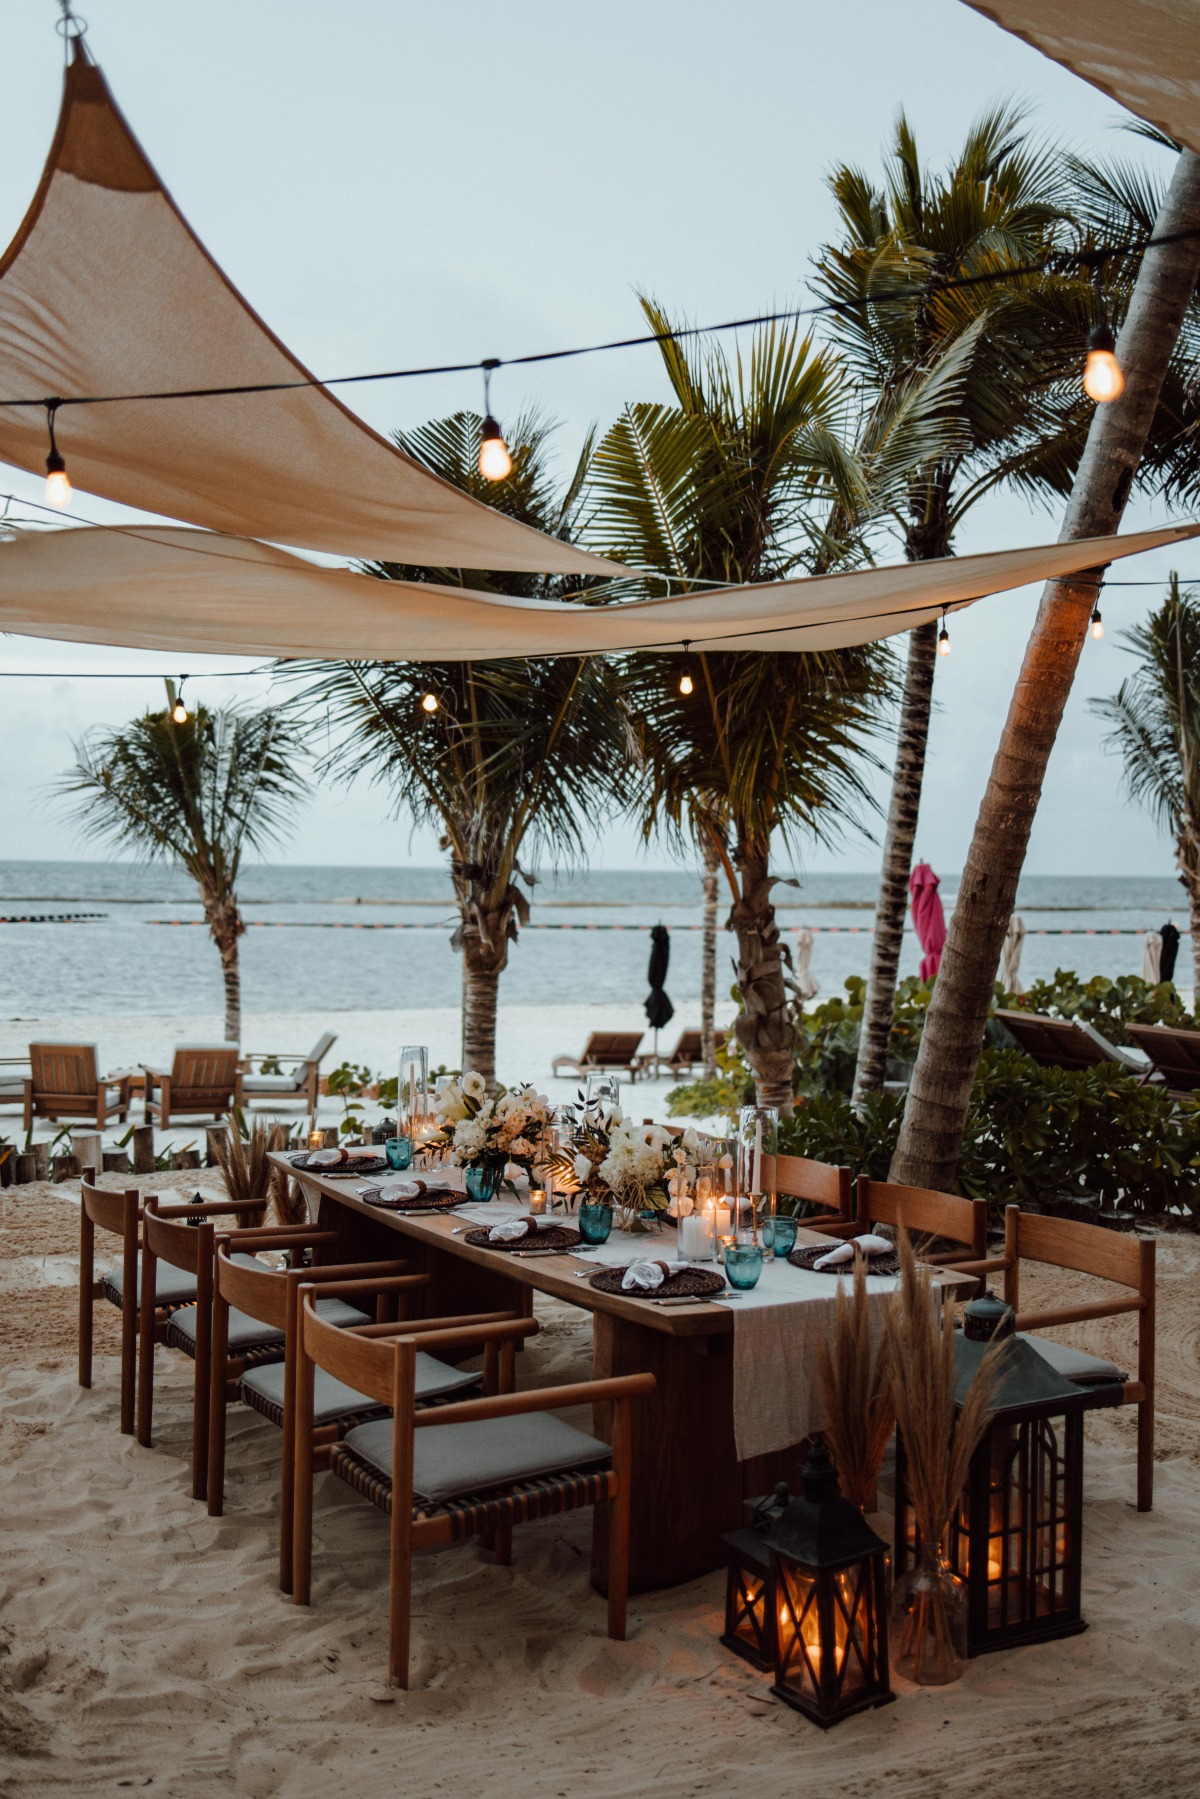 Reception space with tables, palm trees, awnings, and centerpieces next to beach